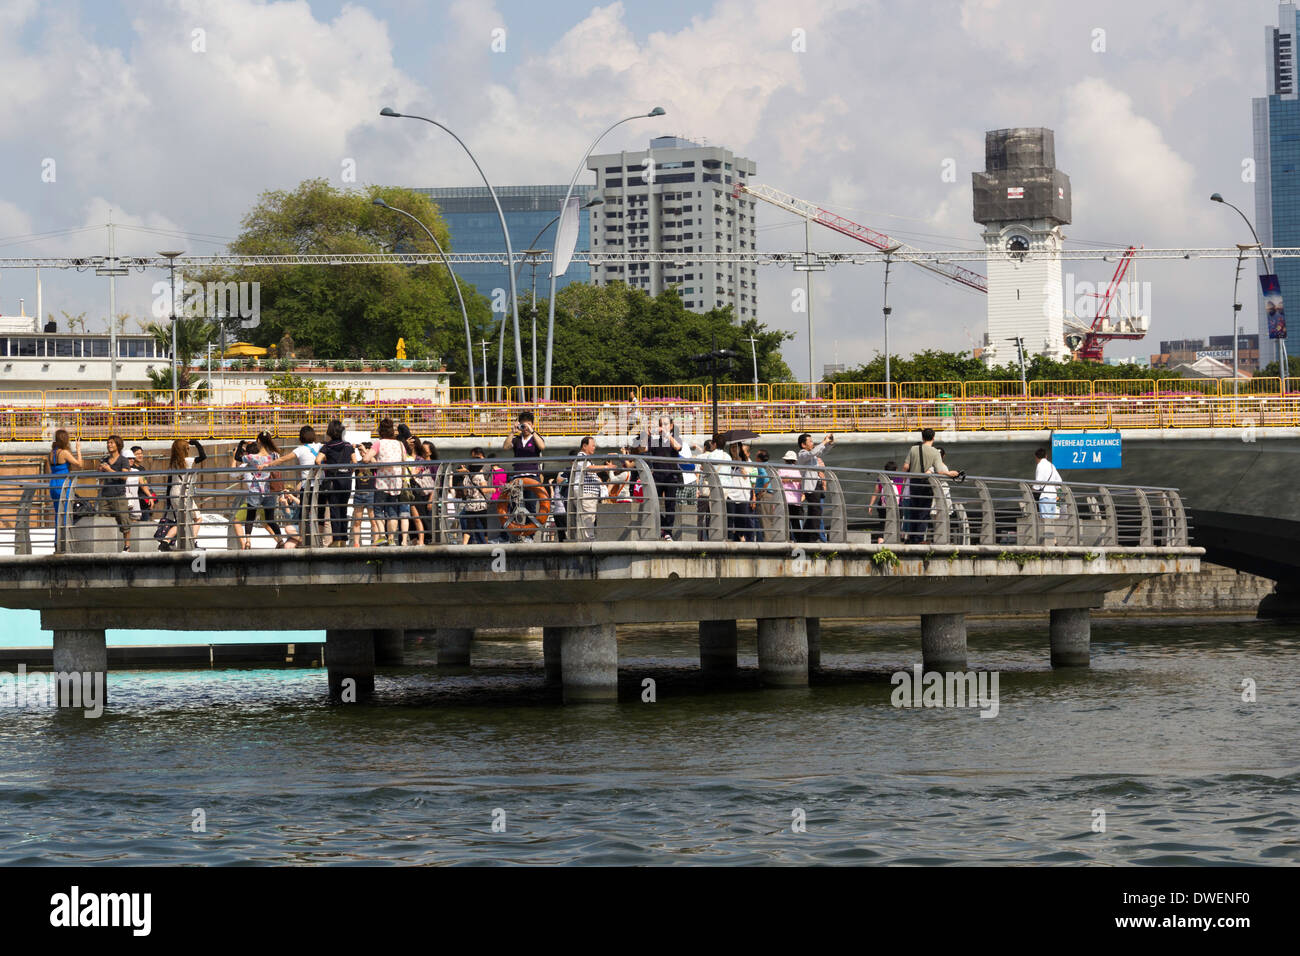 Visitors on viewing plaza on Singapore river next to the Merlion statue, built on a platform with support pillars Stock Photo